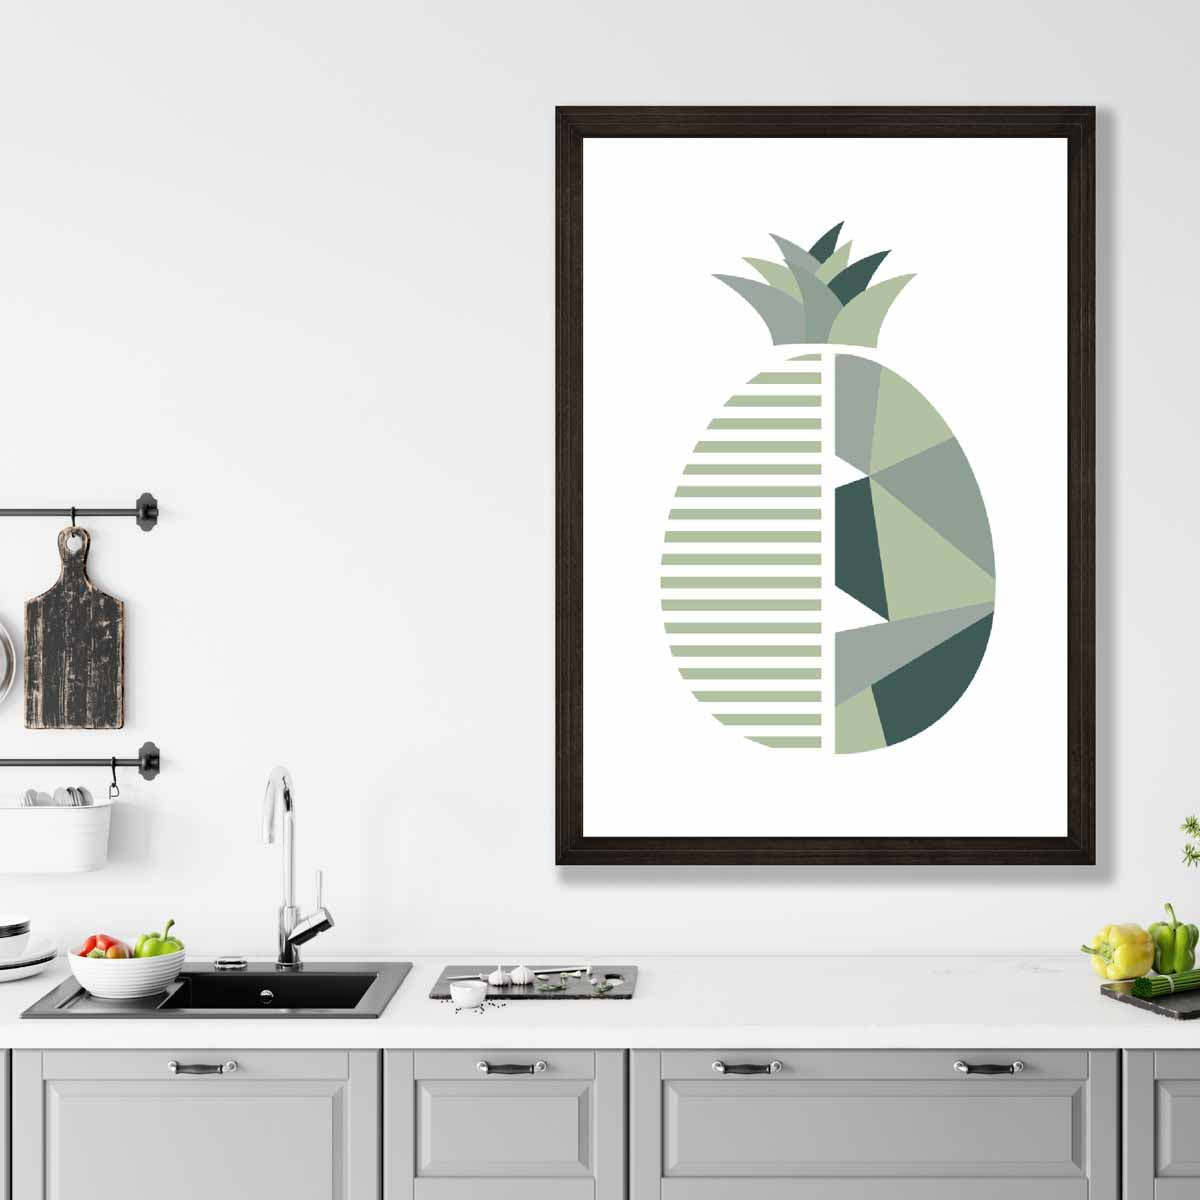 Geometric Fruit Poster of Pineapple in Sage green